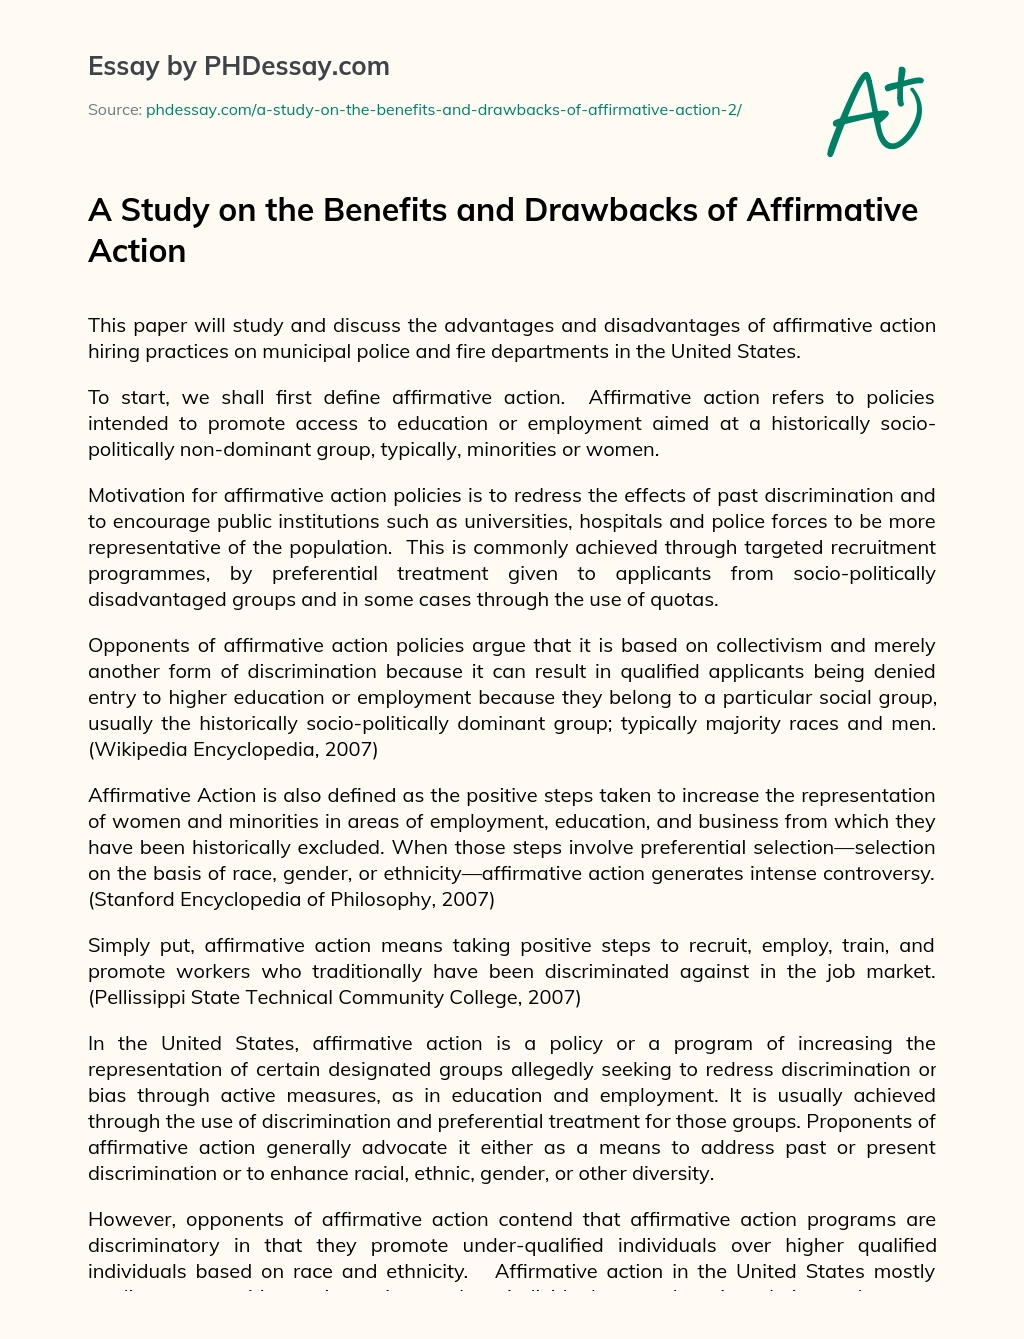 A Study on the Benefits and Drawbacks of Affirmative Action essay